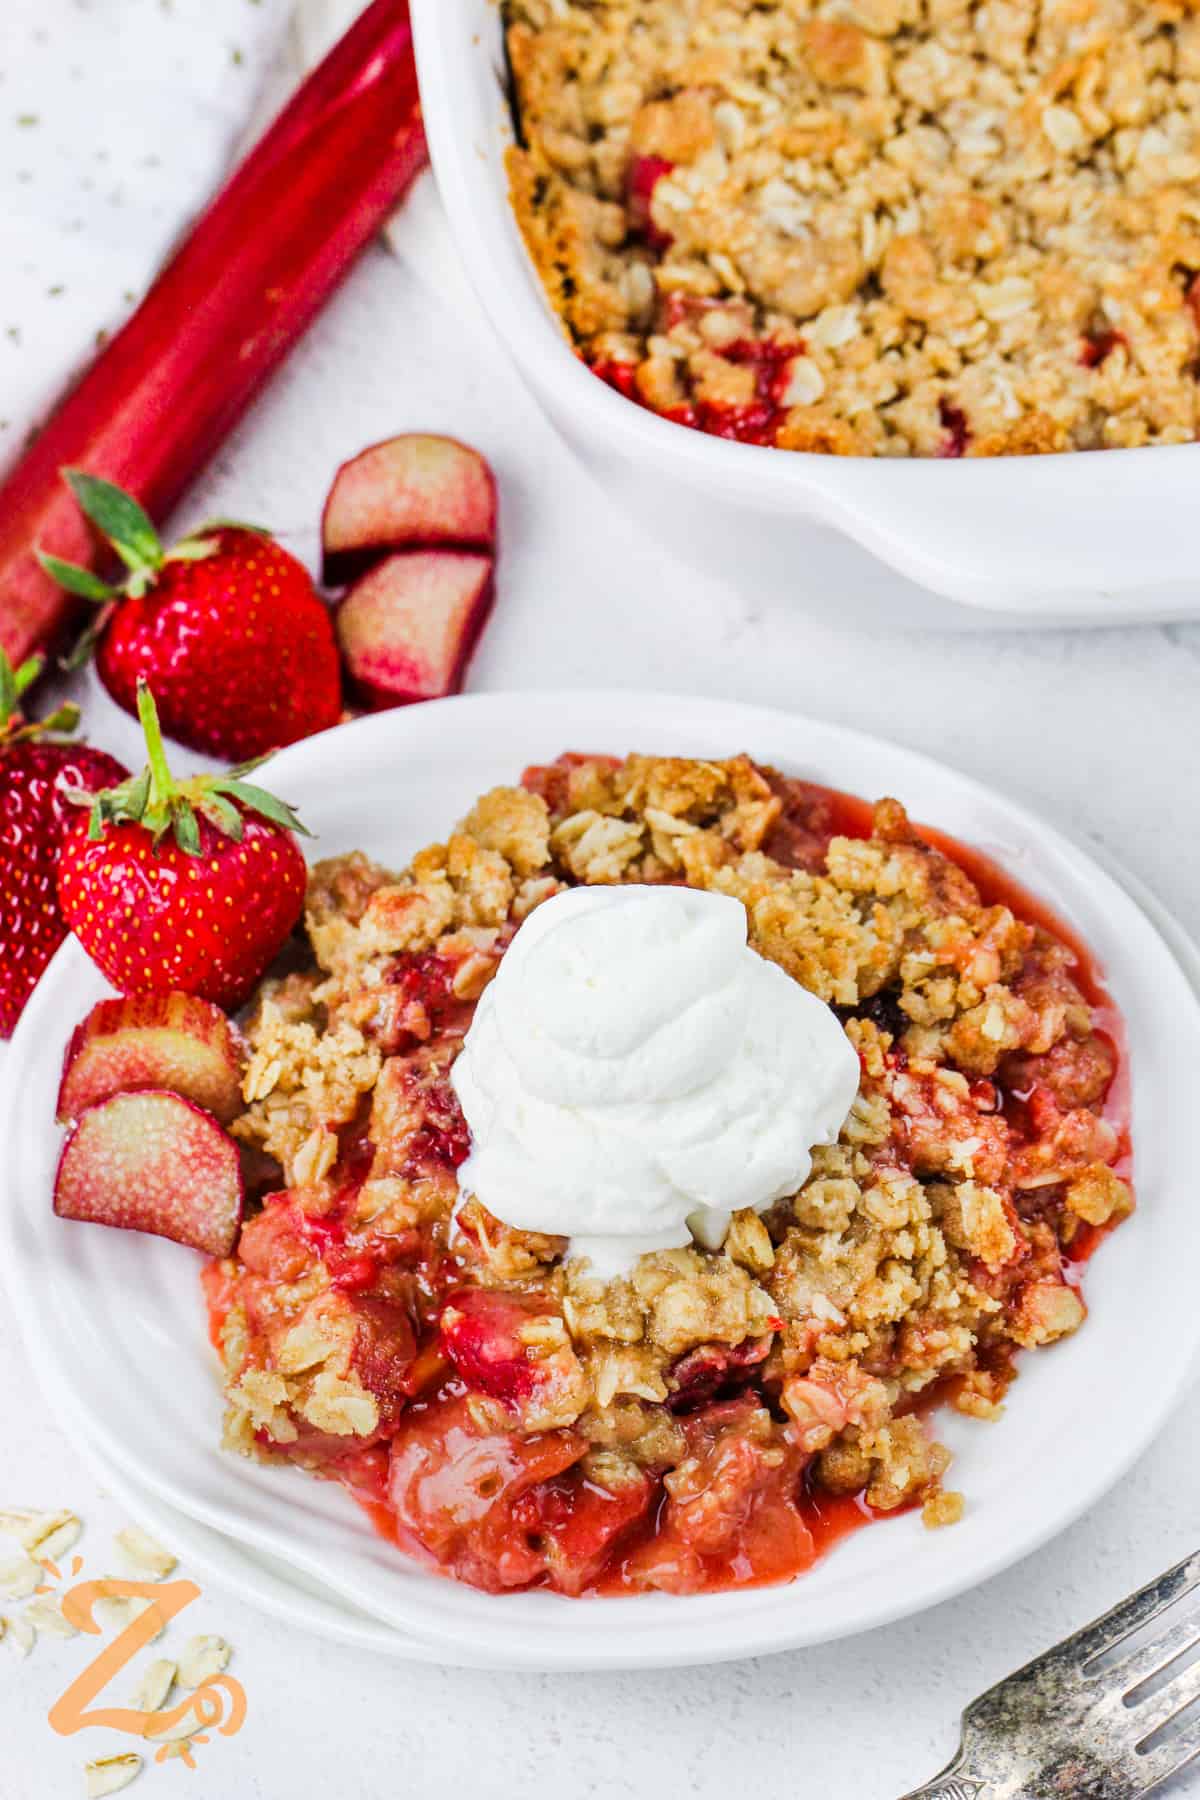 Strawberry Rhubarb Crisp with whipped cream